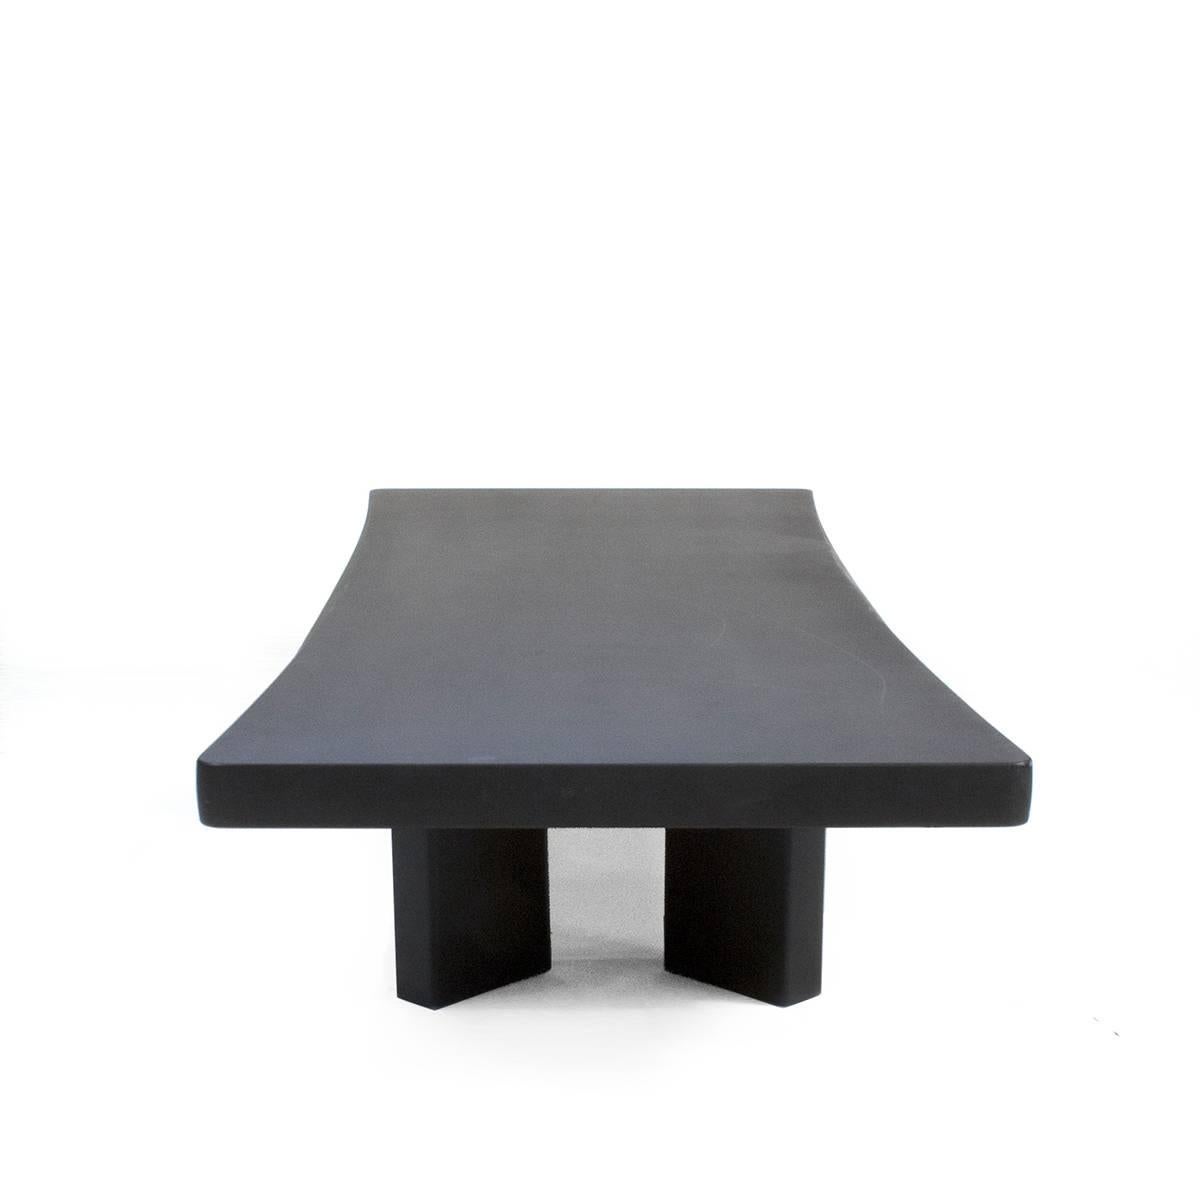 Italian Cassina Plana Low Wood Coffee Table by Charlotte Perriand, Modern, Black, Italy For Sale